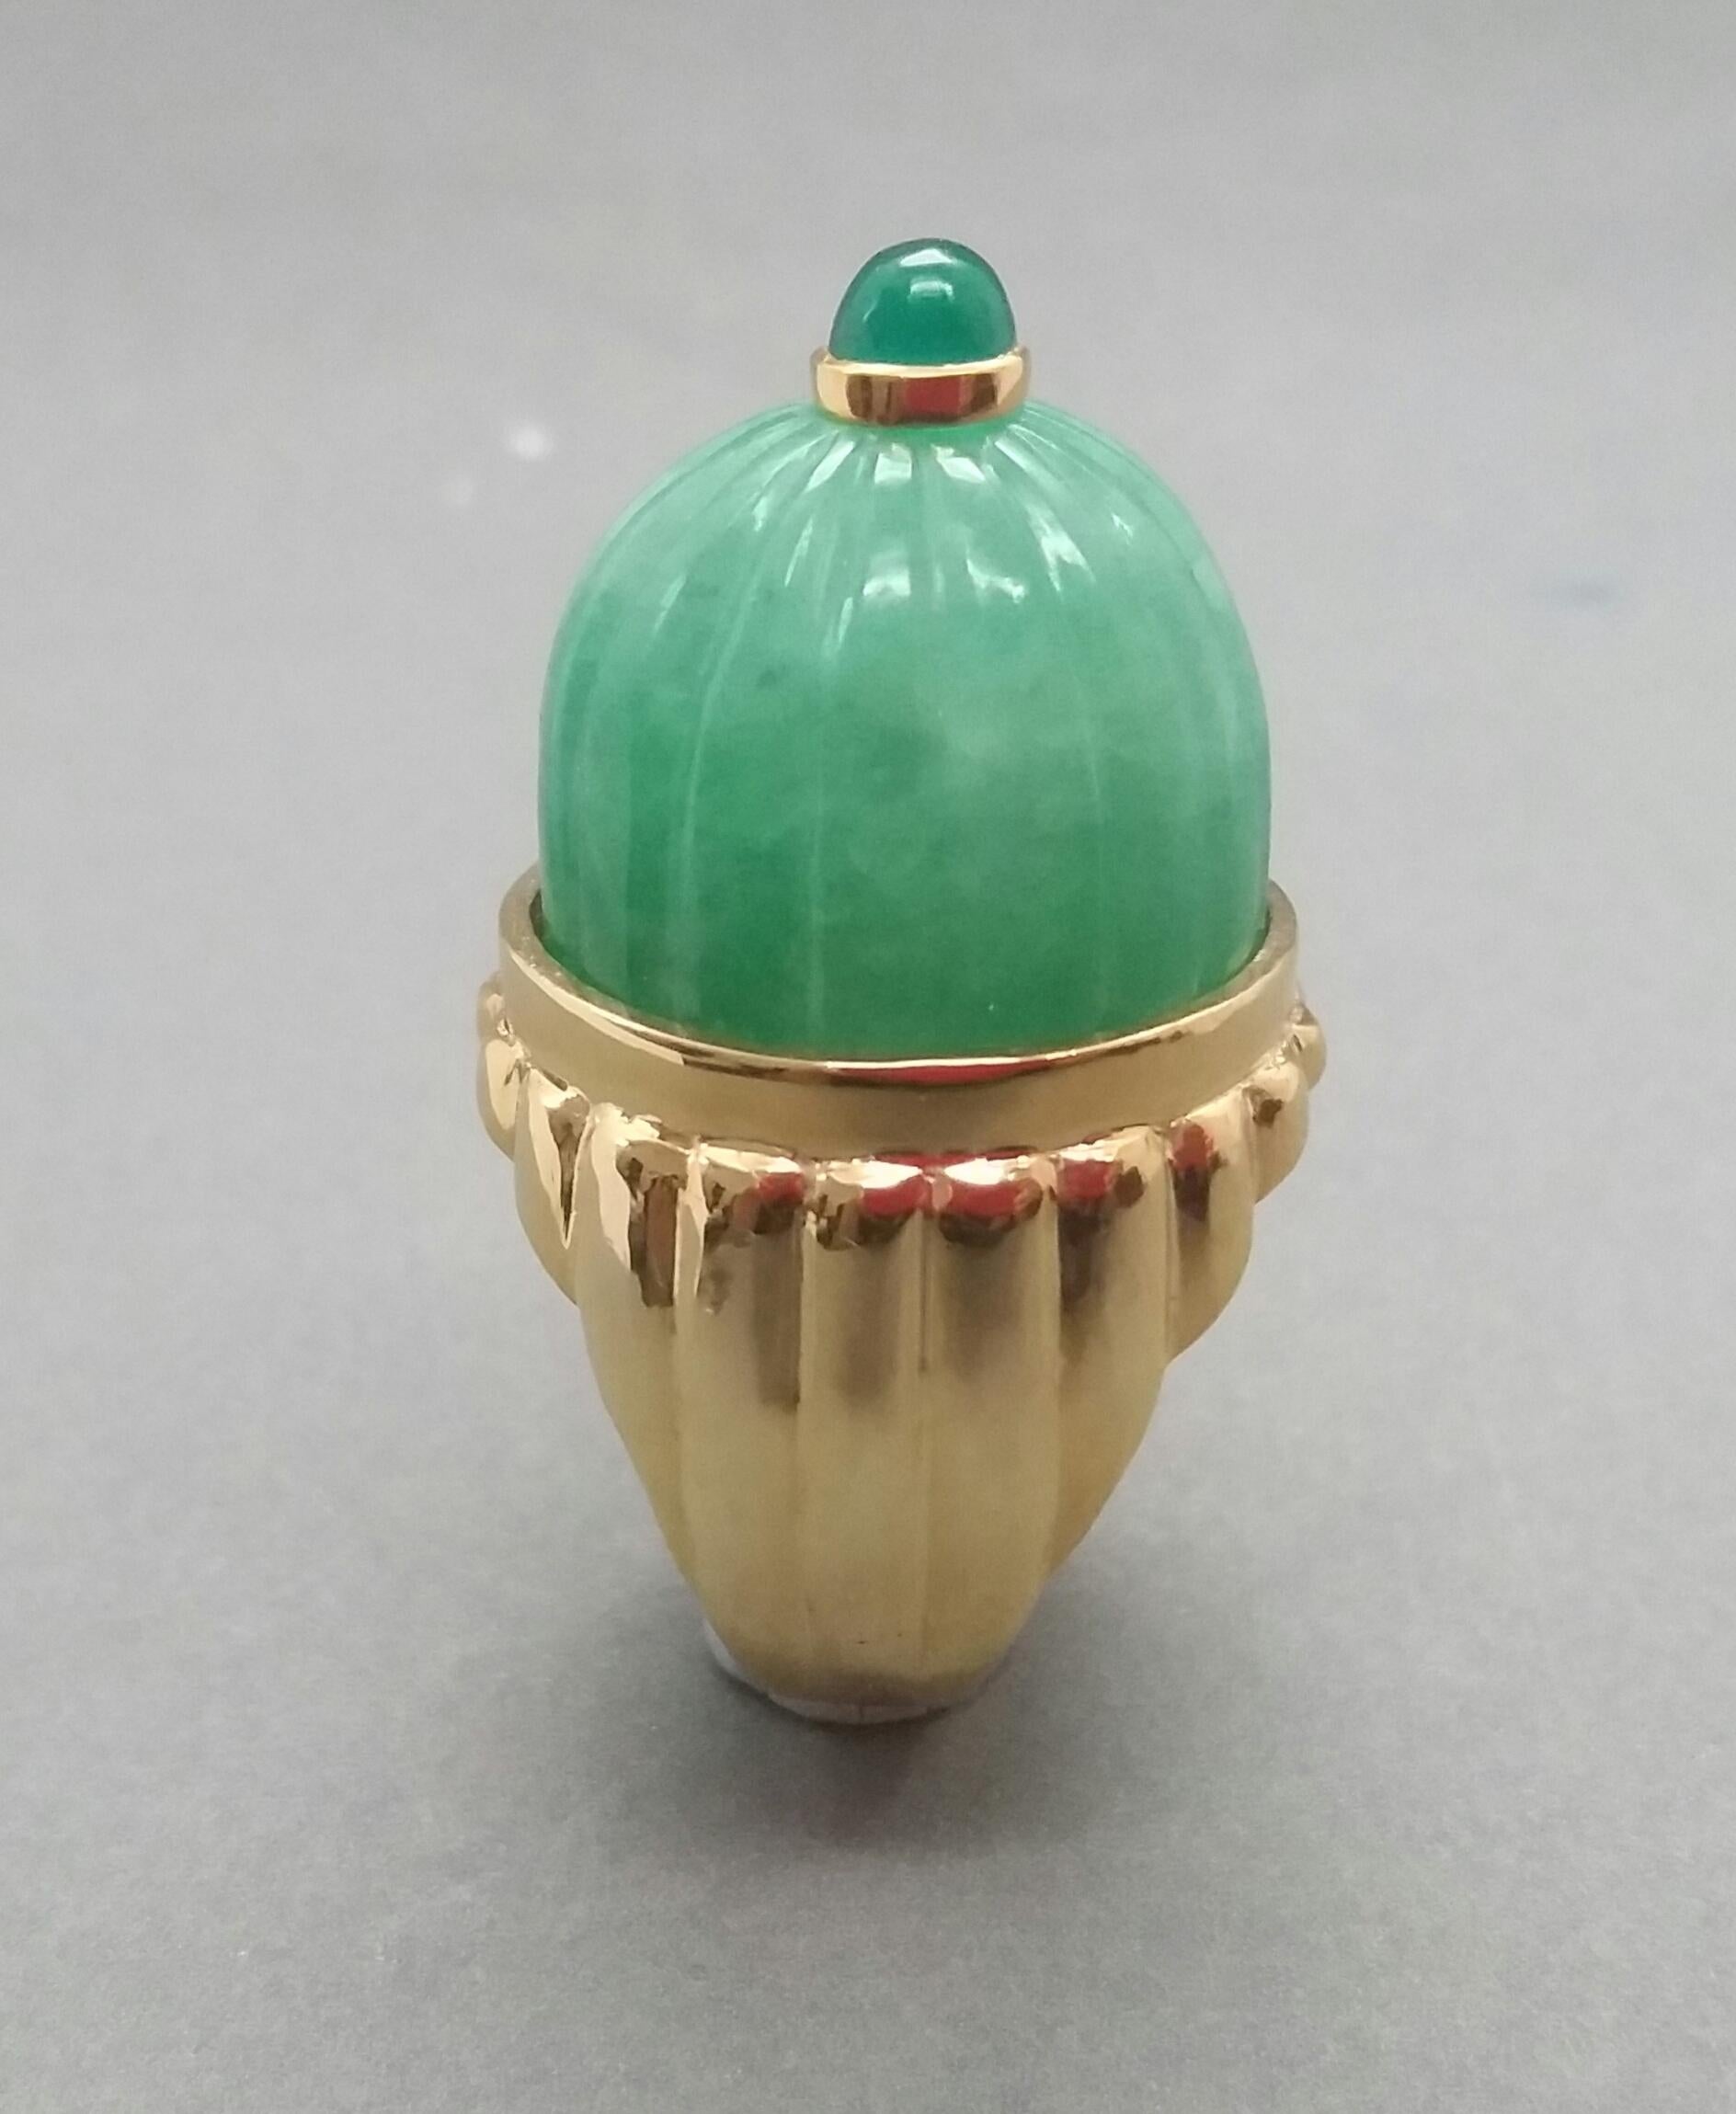 An Engraved Burma Jade Cabochon measuring 20 mm in diameter and 15 mm in hight with a Emerald 5 mm round cabochon set in yellow gold on top are mounted on a 14 kt yellow gold  engraved shank  weighing more than 9 grams.

In 1978 our workshop started